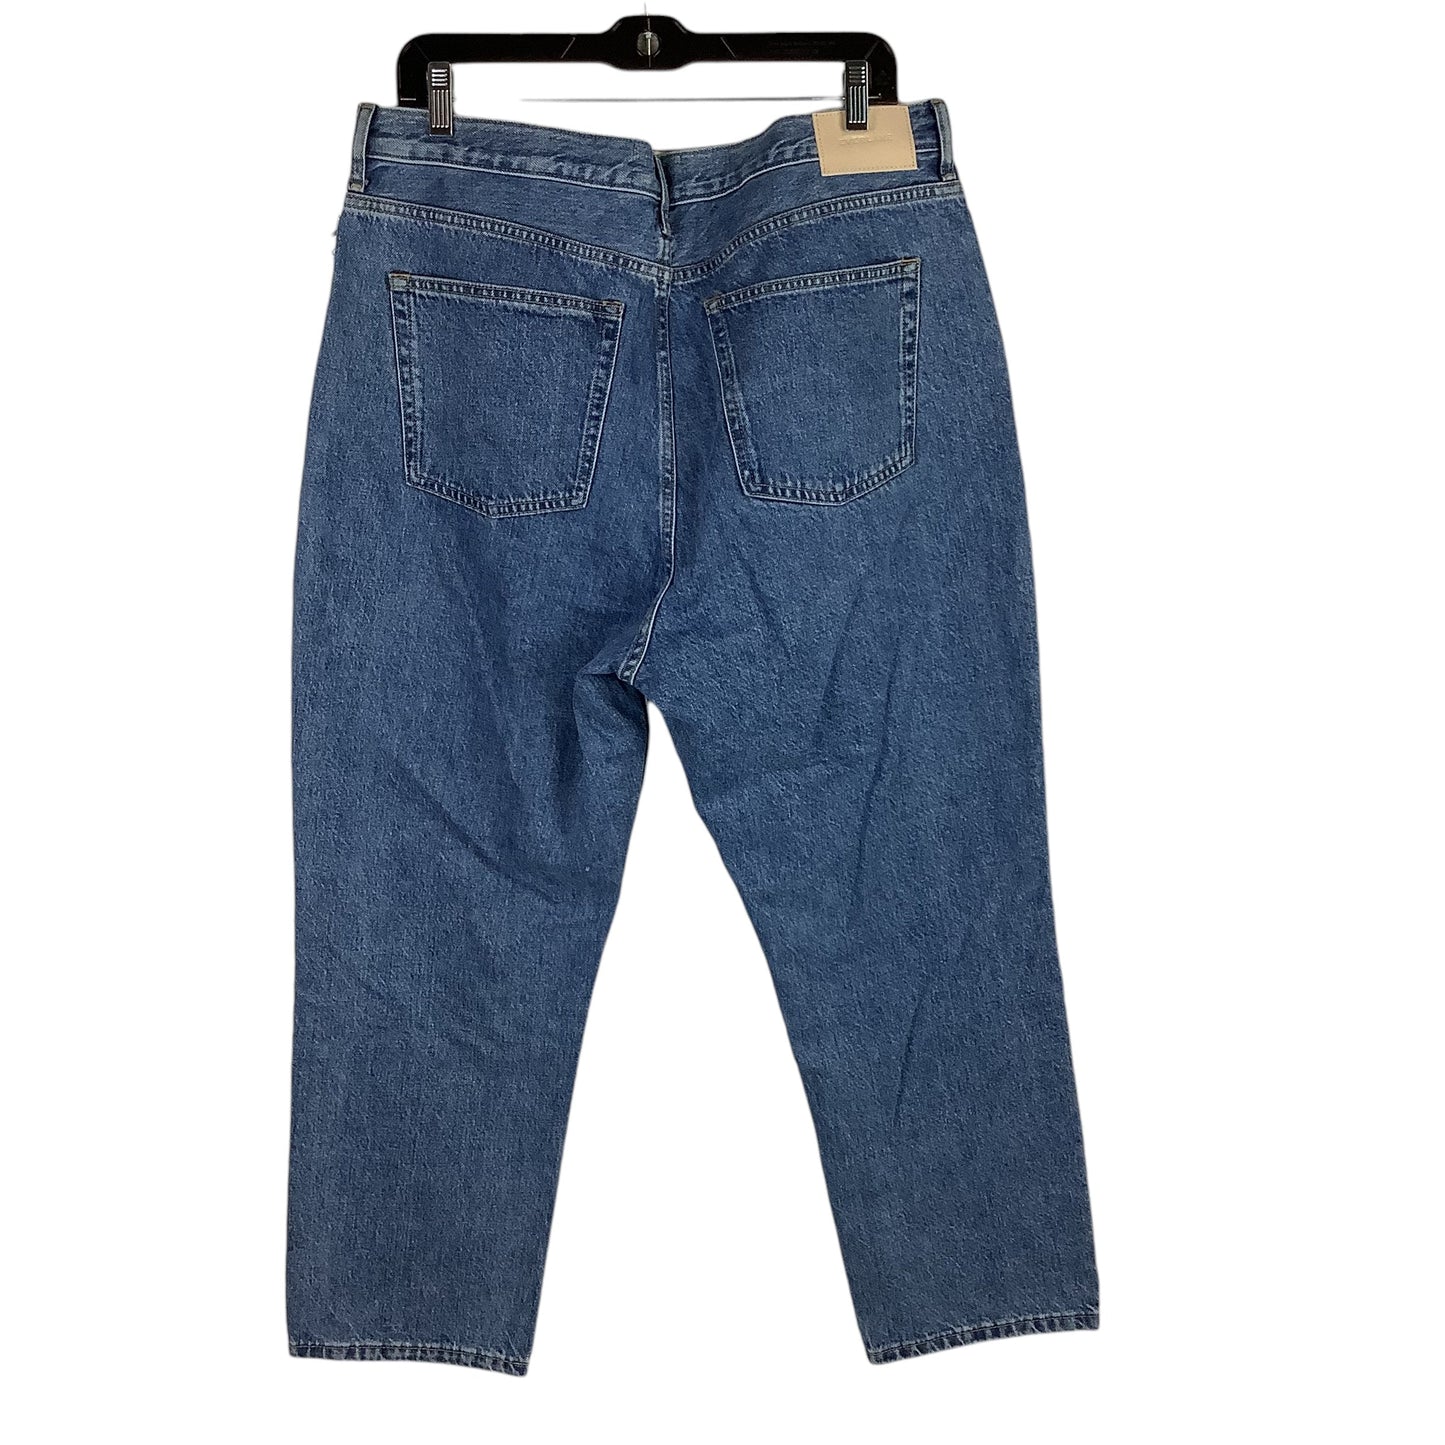 Jeans Straight By Everlane  Size: 16